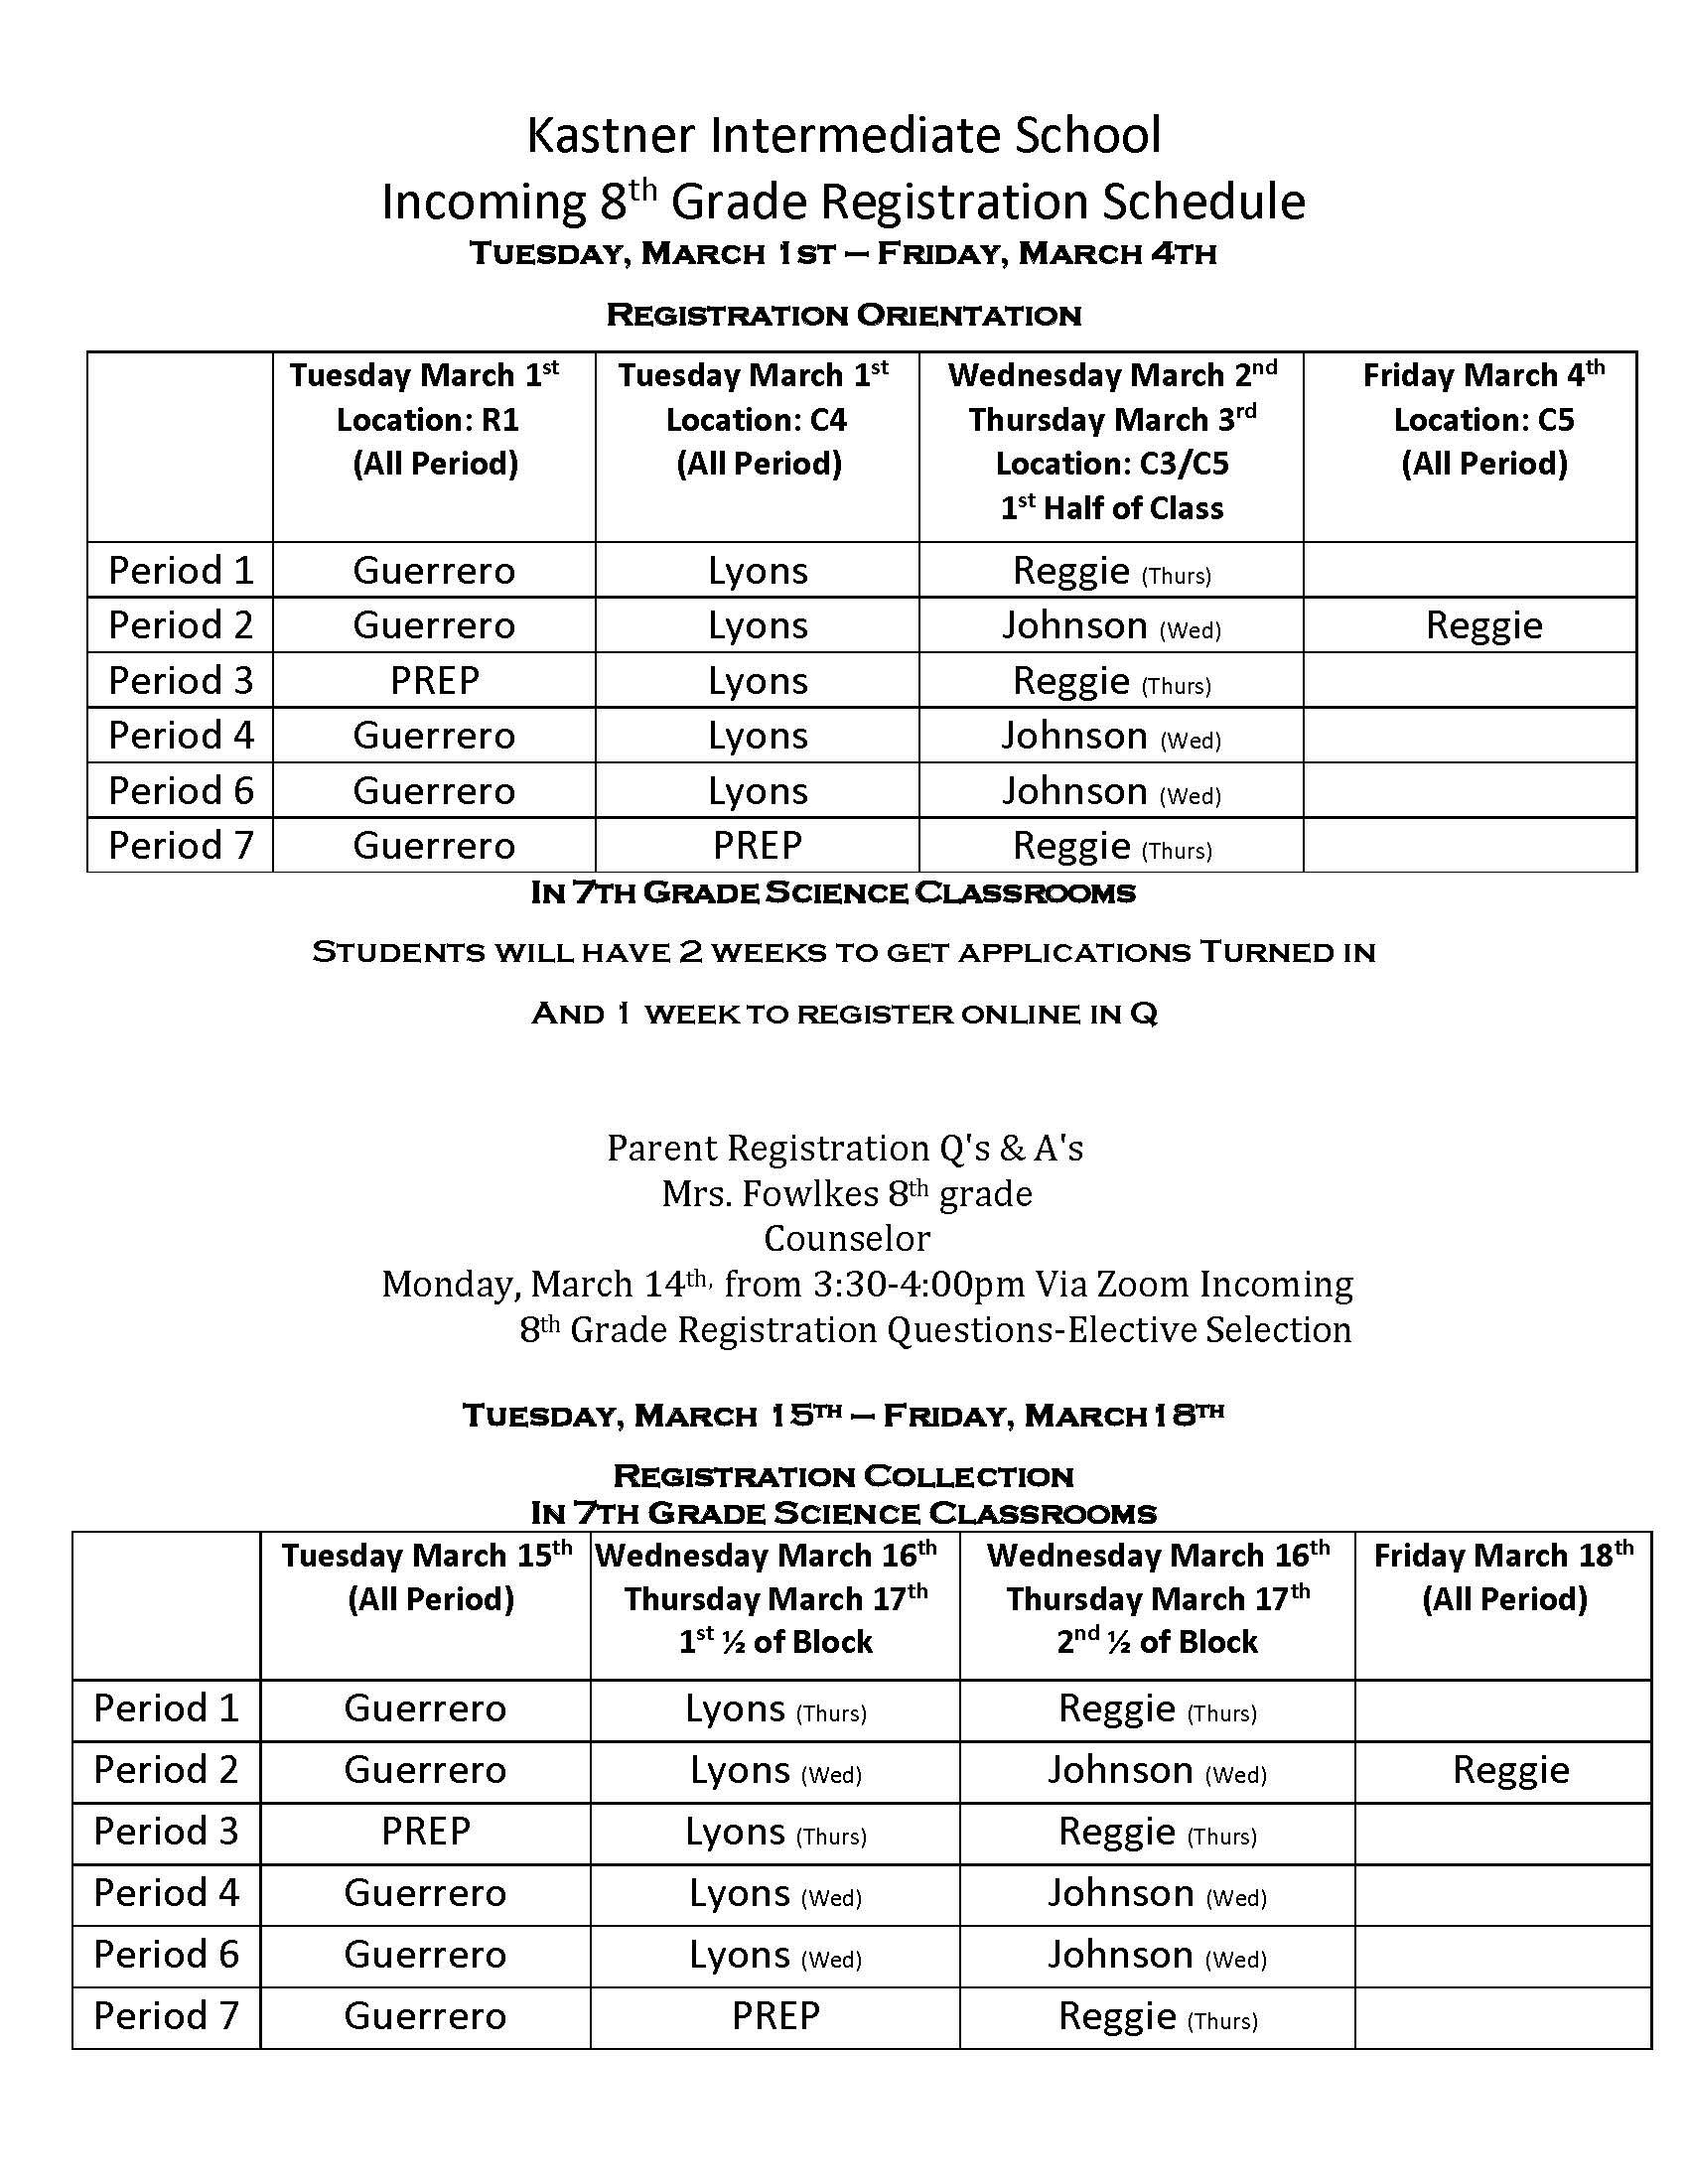 picture of 8th grade registration schedule